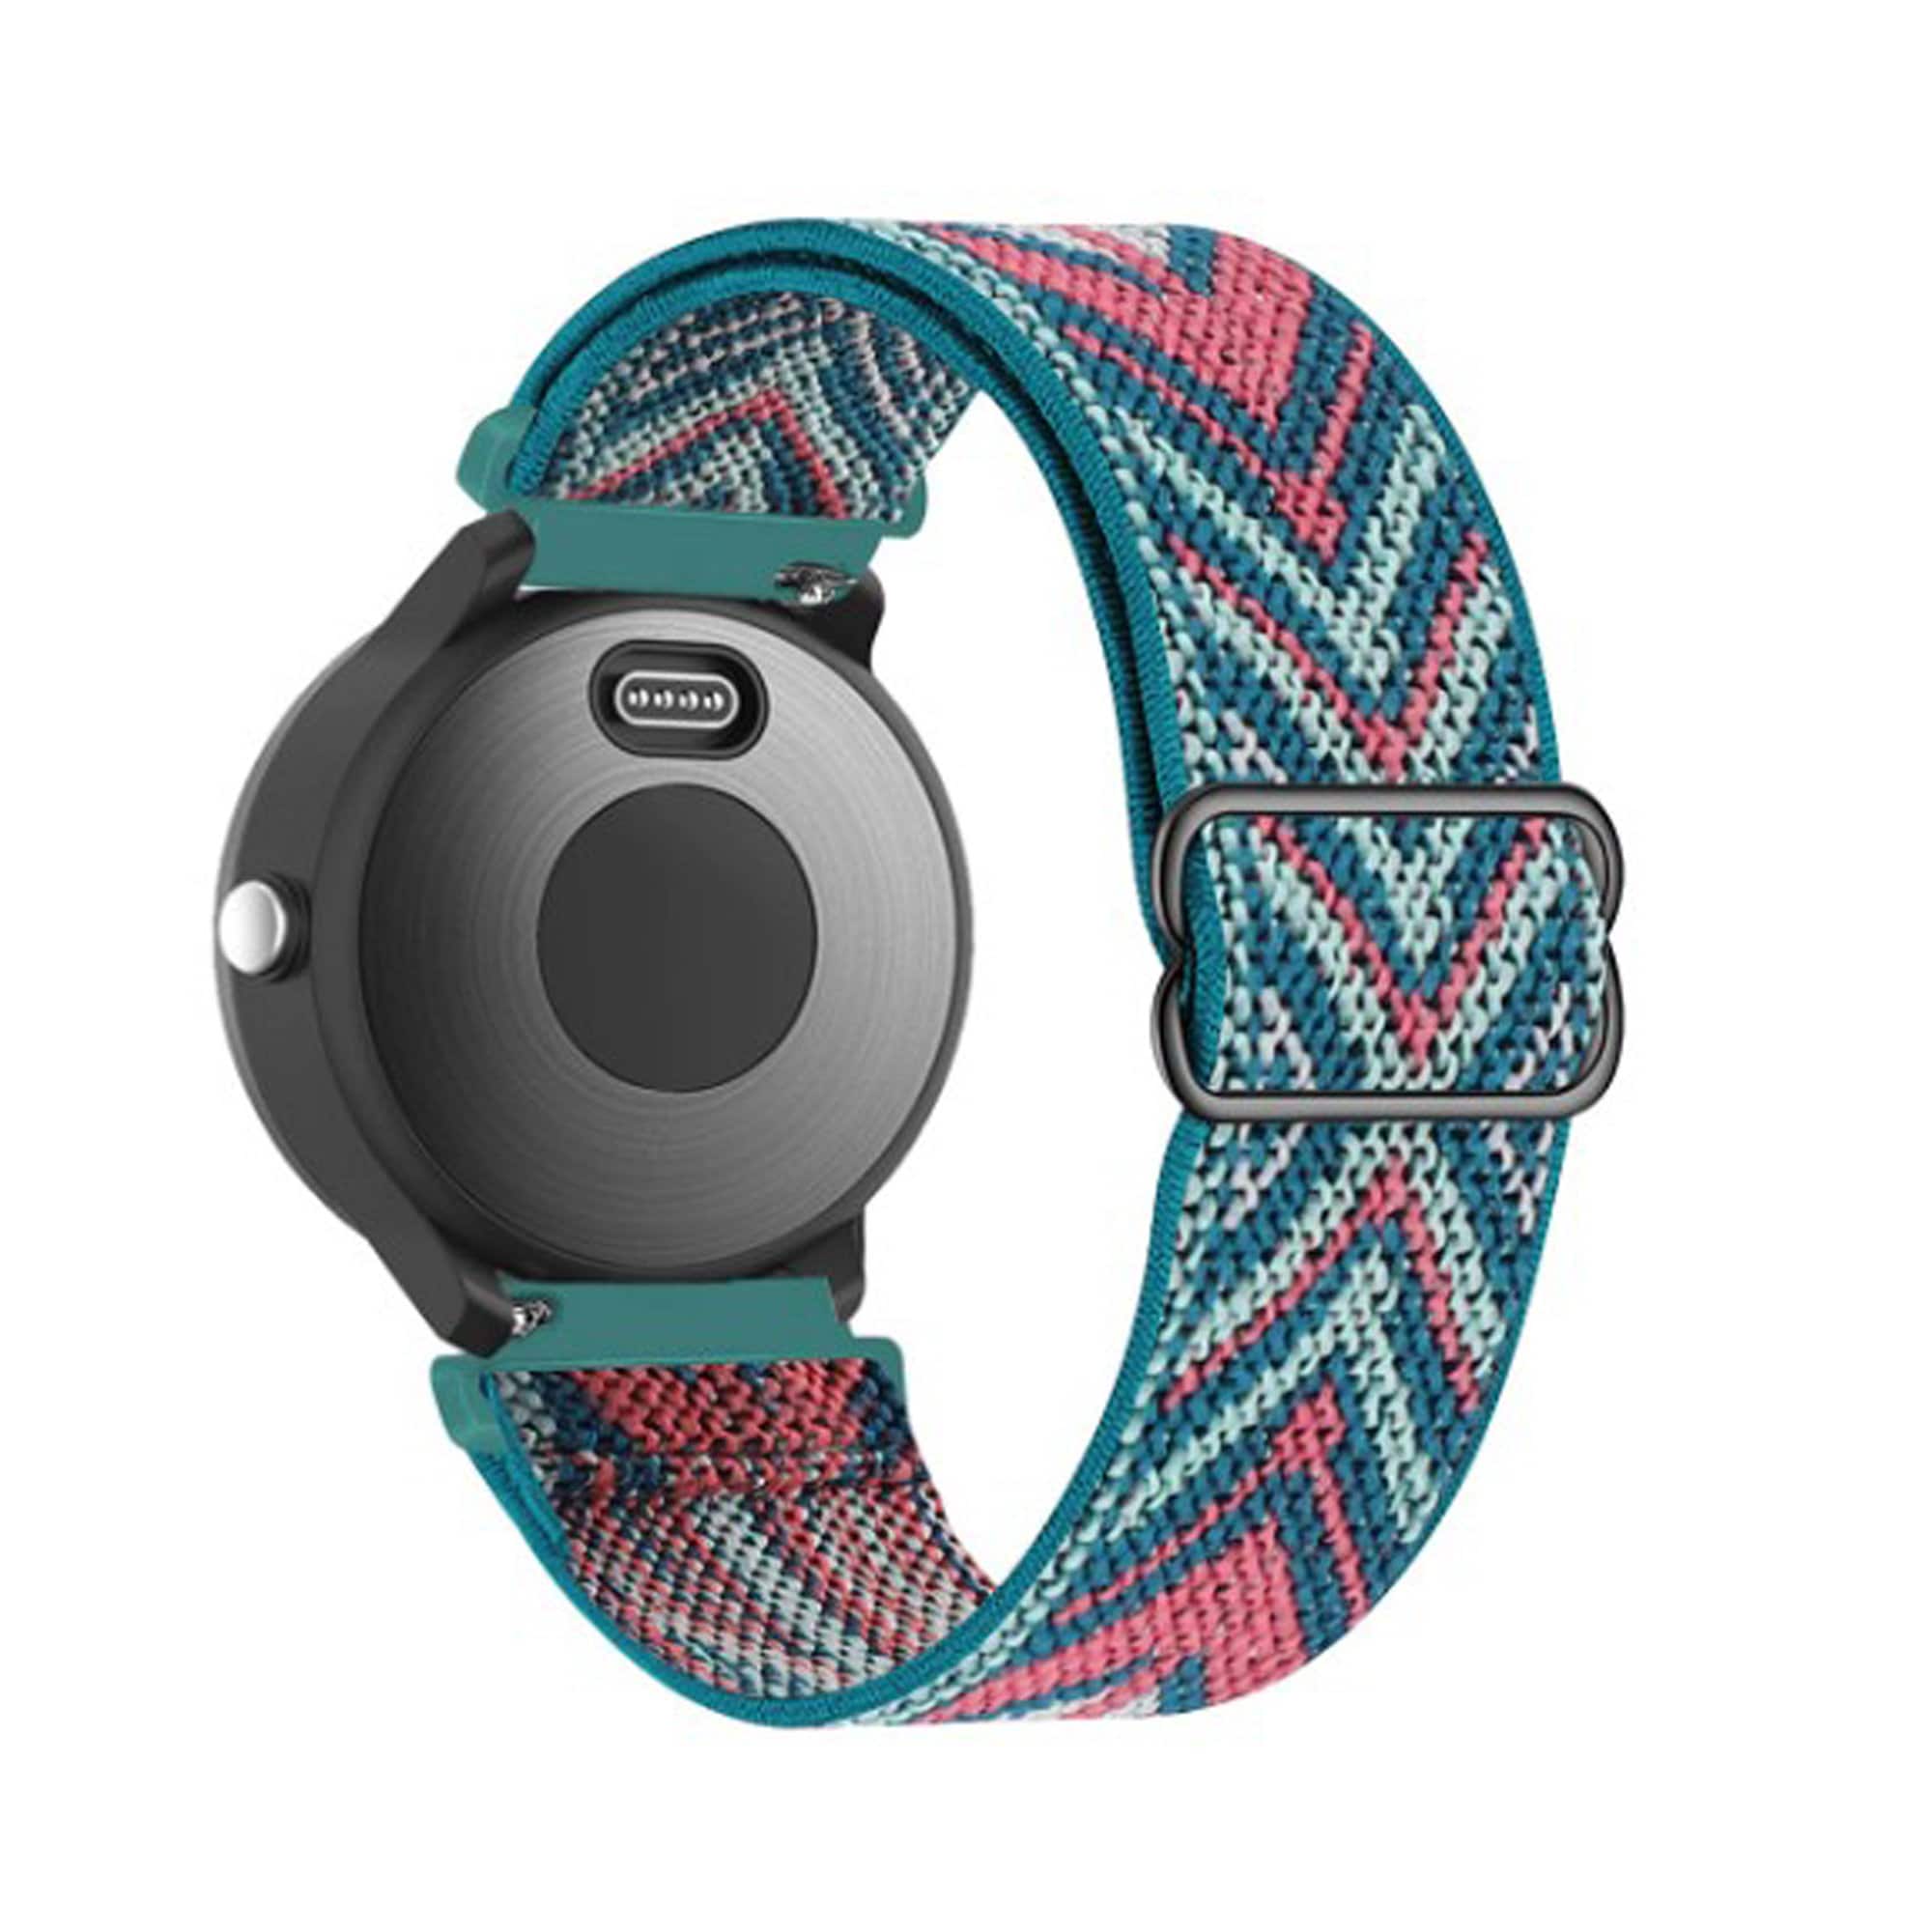 For Garmin Forerunner 35 Watch Replacement Silicone Wrist Band Strap  Bracelet